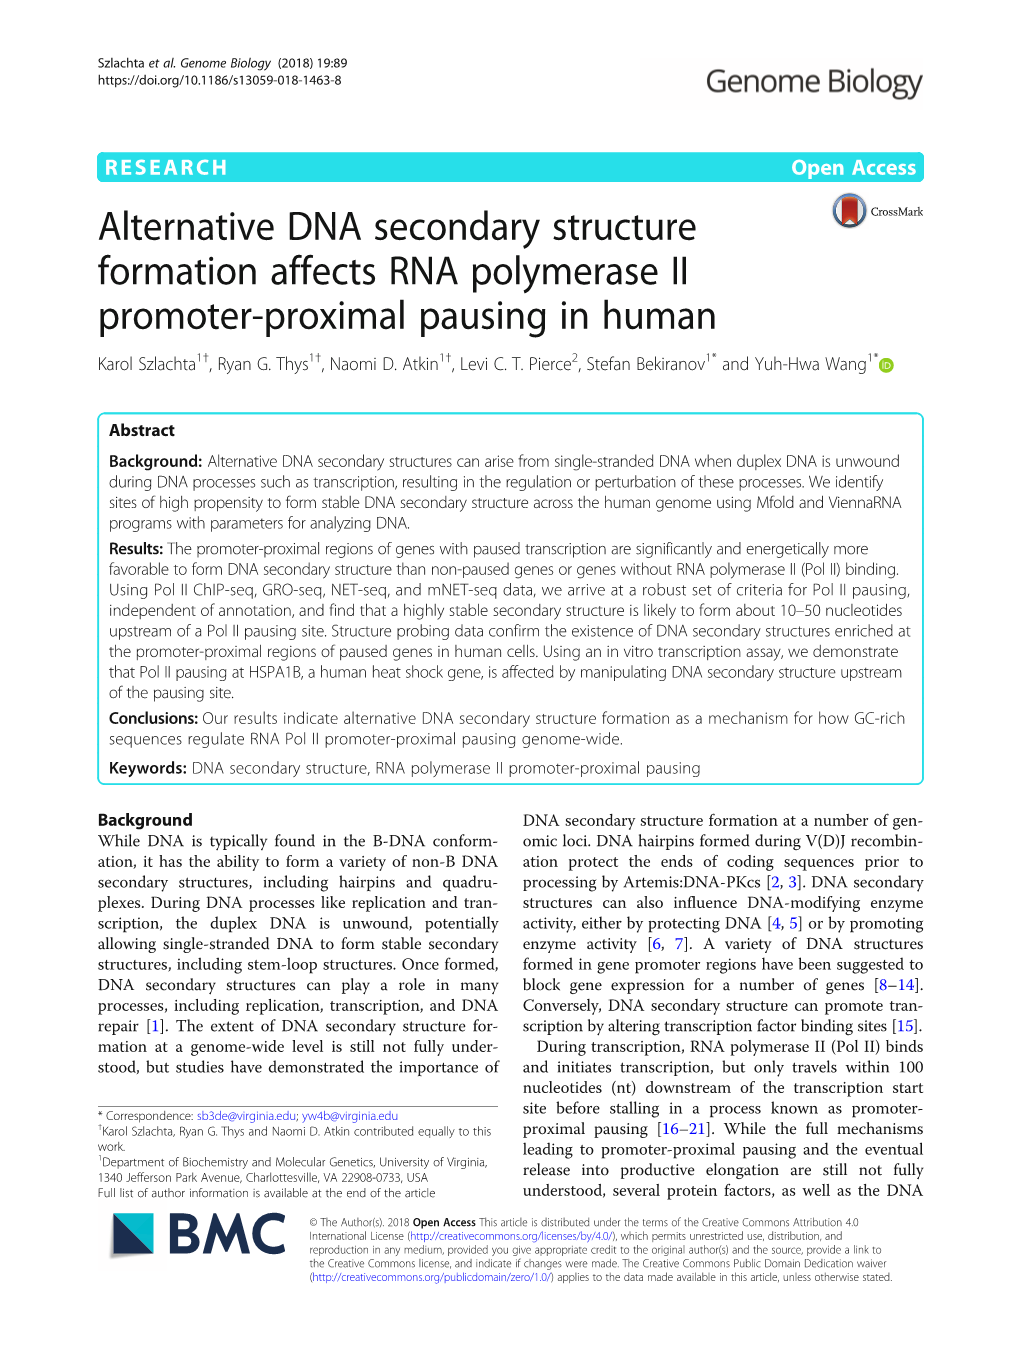 Alternative DNA Secondary Structure Formation Affects RNA Polymerase II Promoter-Proximal Pausing in Human Karol Szlachta1†, Ryan G